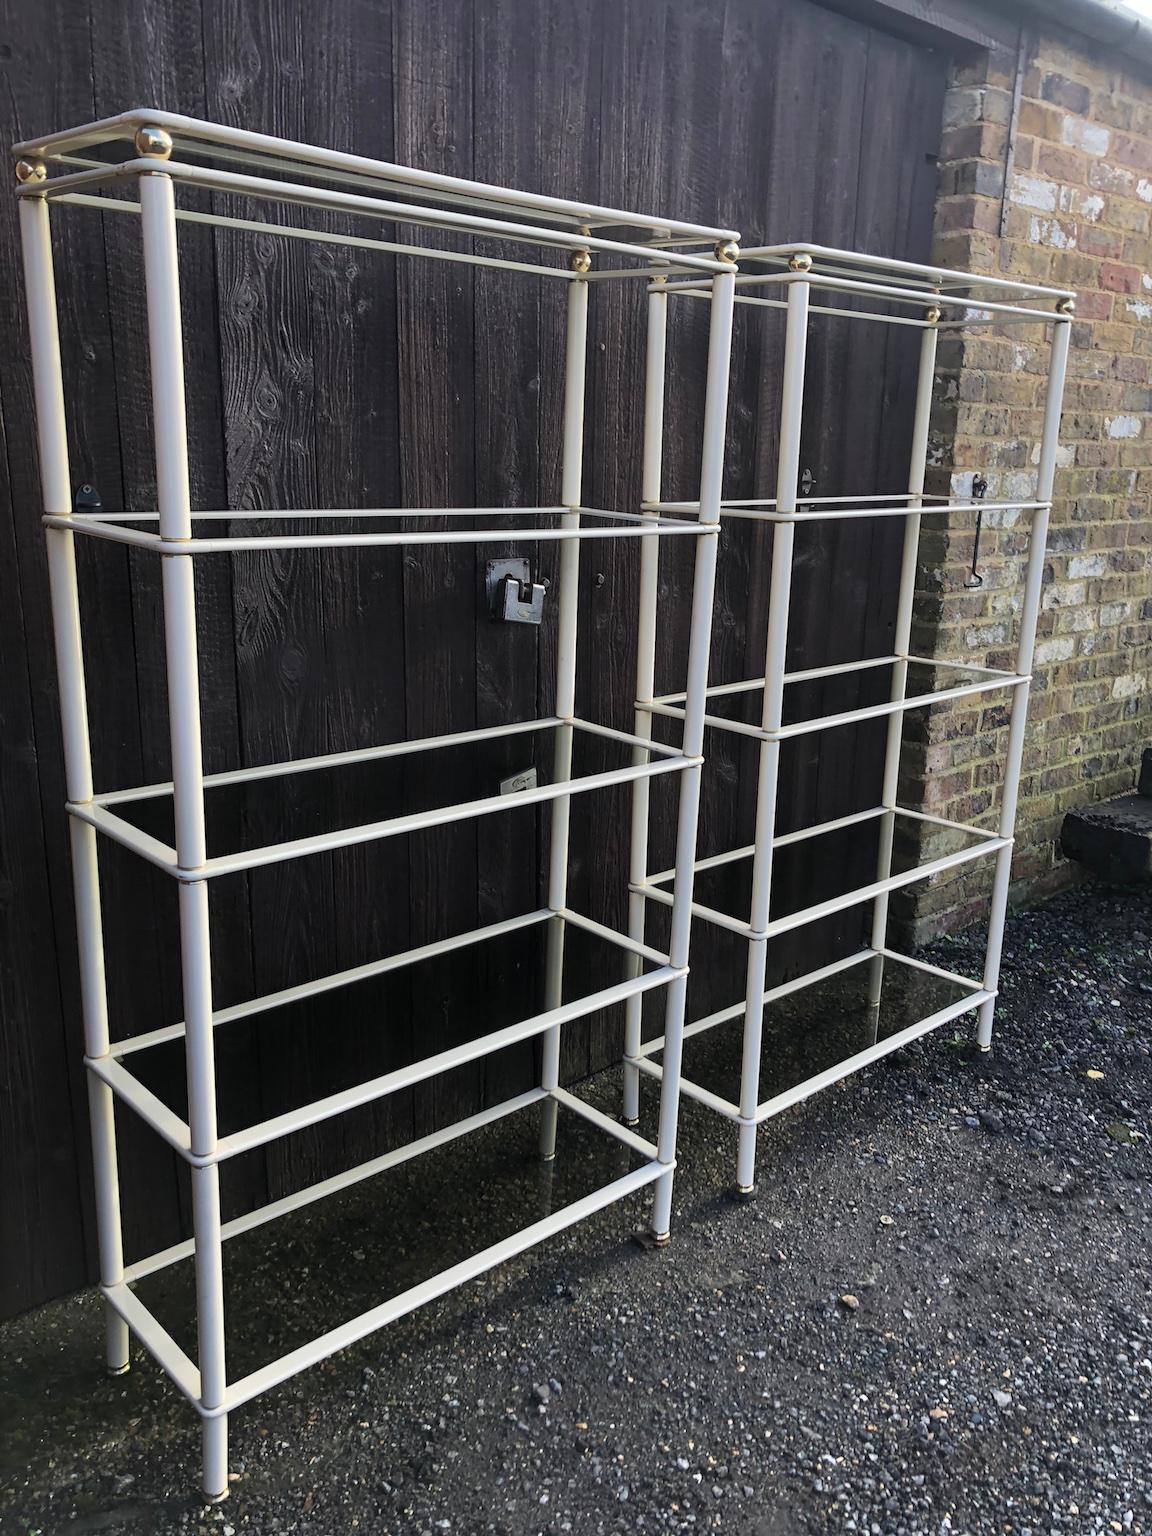 Midcentury Cream and Gold Metal Shelving Units, Italian, 1980s In Good Condition For Sale In Richmond, Surrey